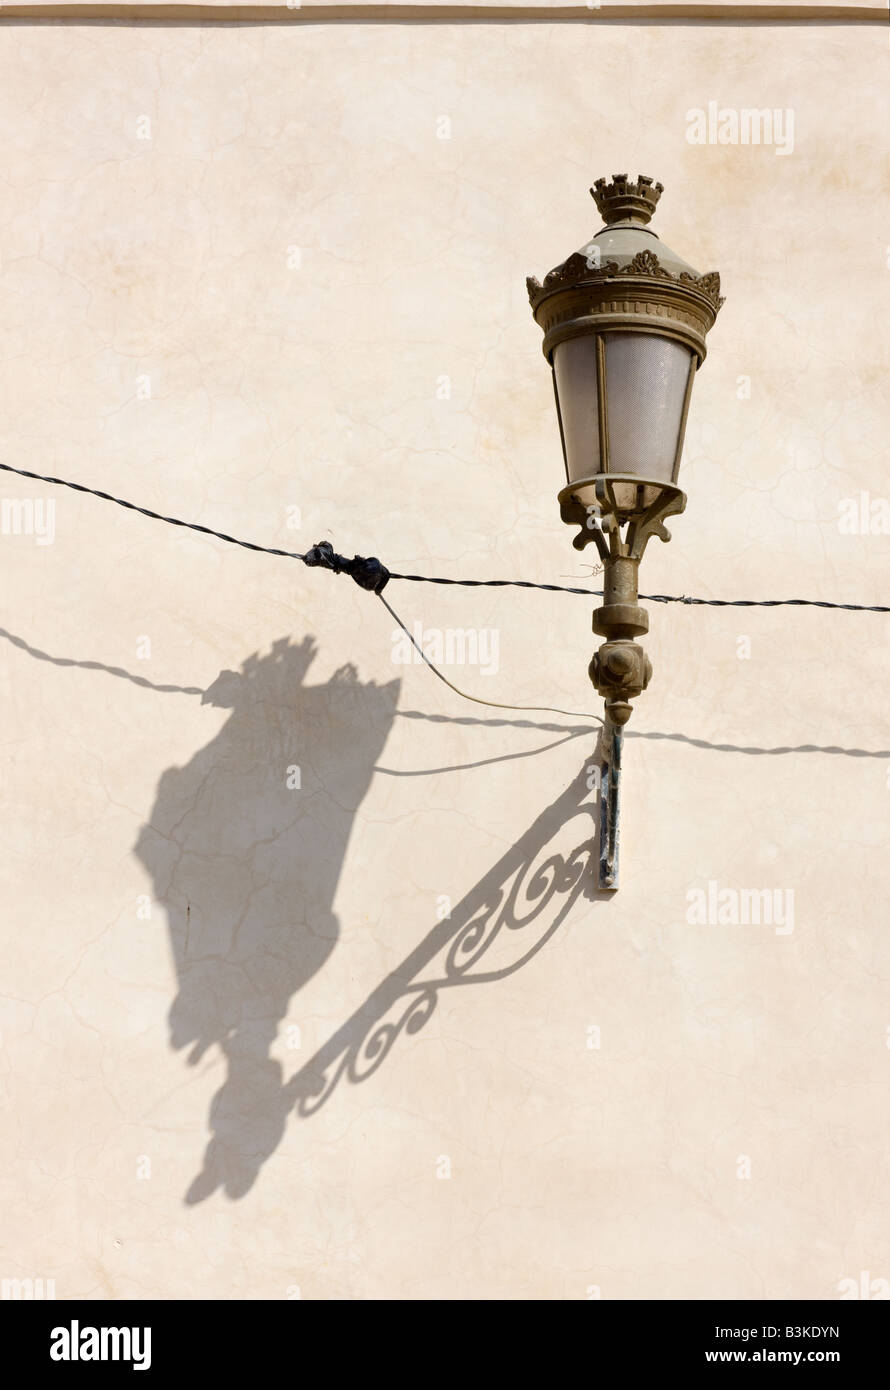 Une lampe marocaine hung on wall Banque D'Images